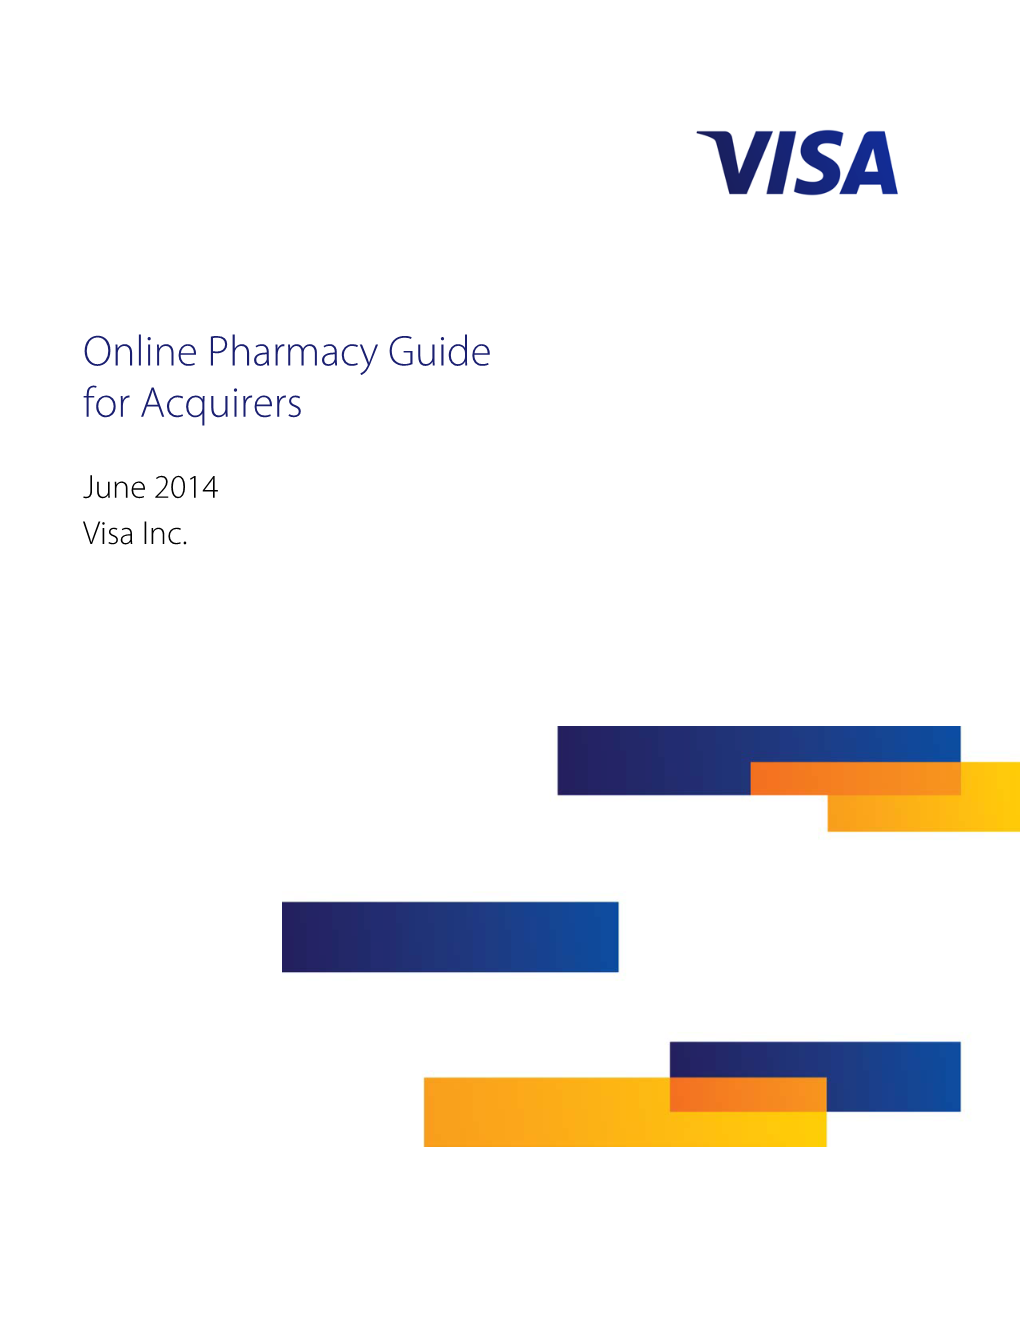 Online Pharmacy Guide for Acquirers